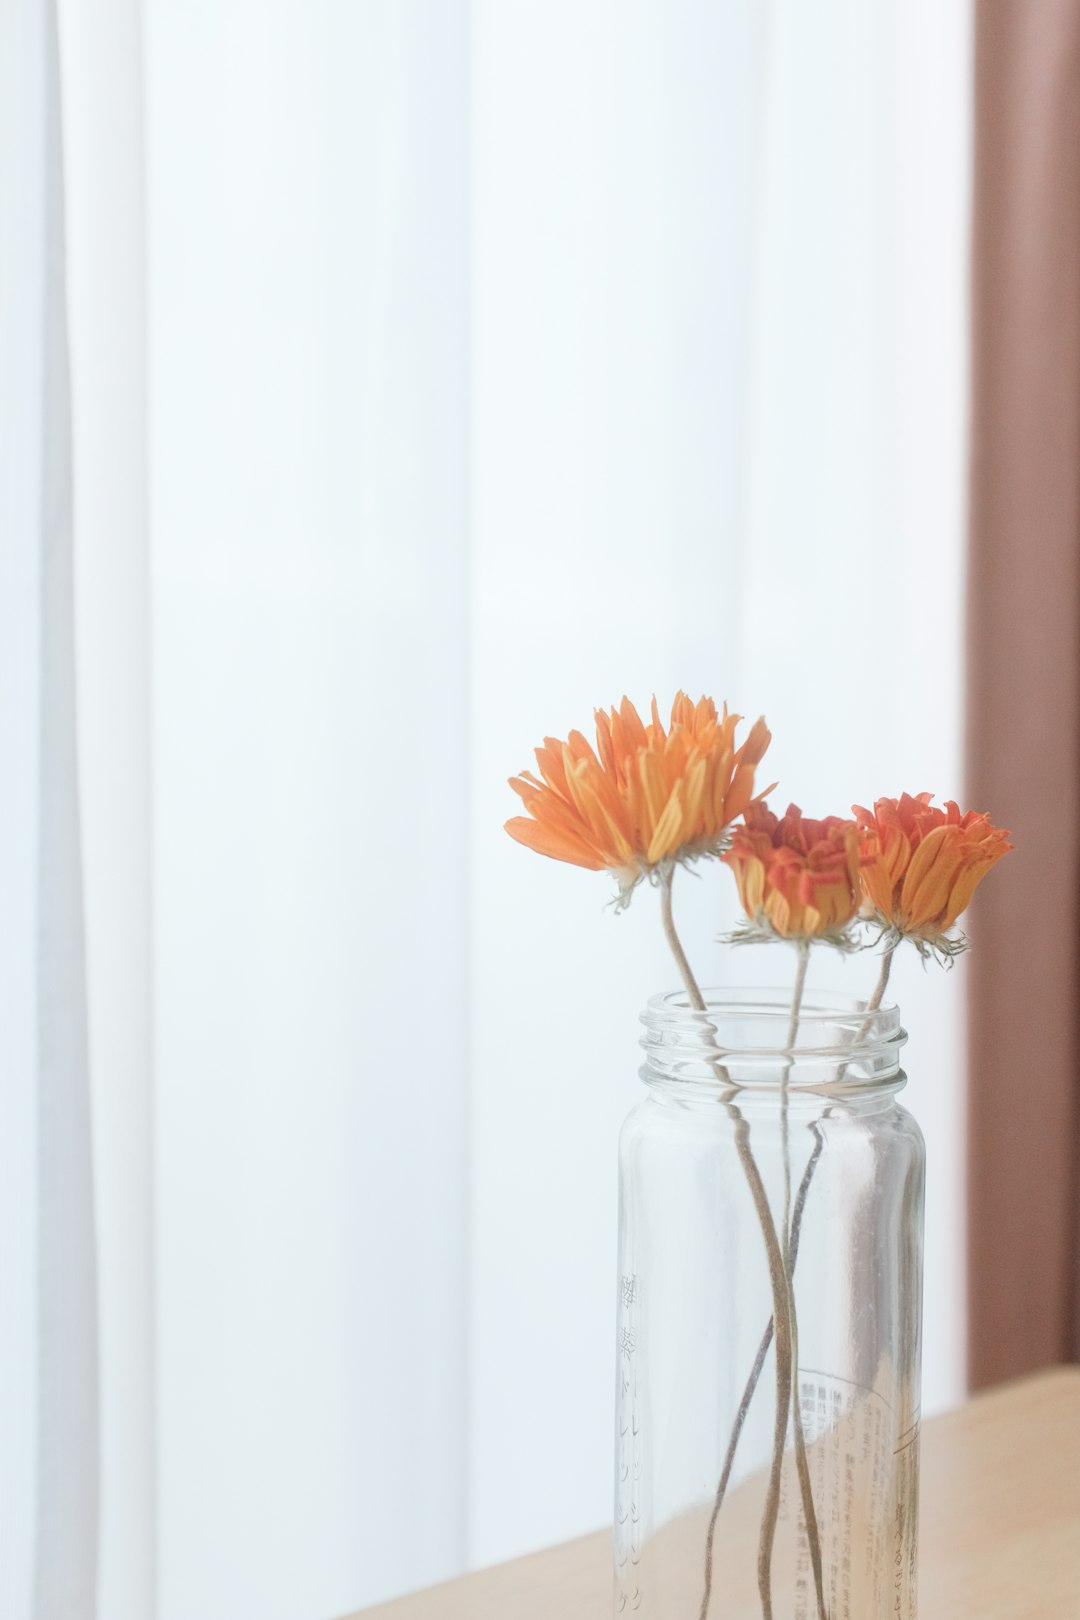 orange and yellow flowers in clear glass vase